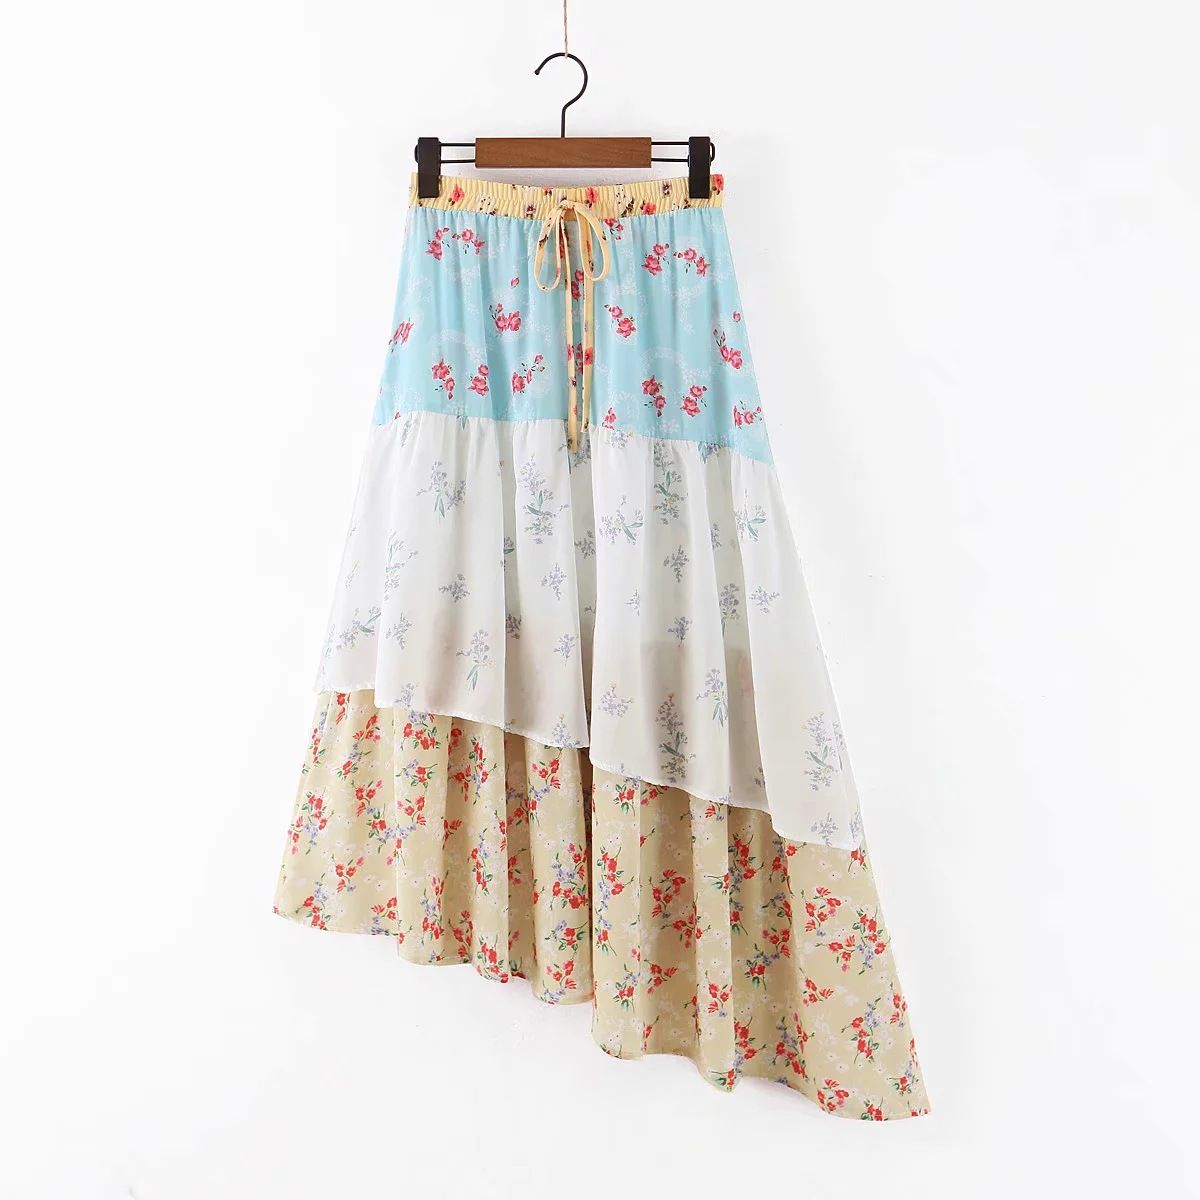 Buy Dropshipping Skirts Online, Cheap Floral Print High Low Skirts 